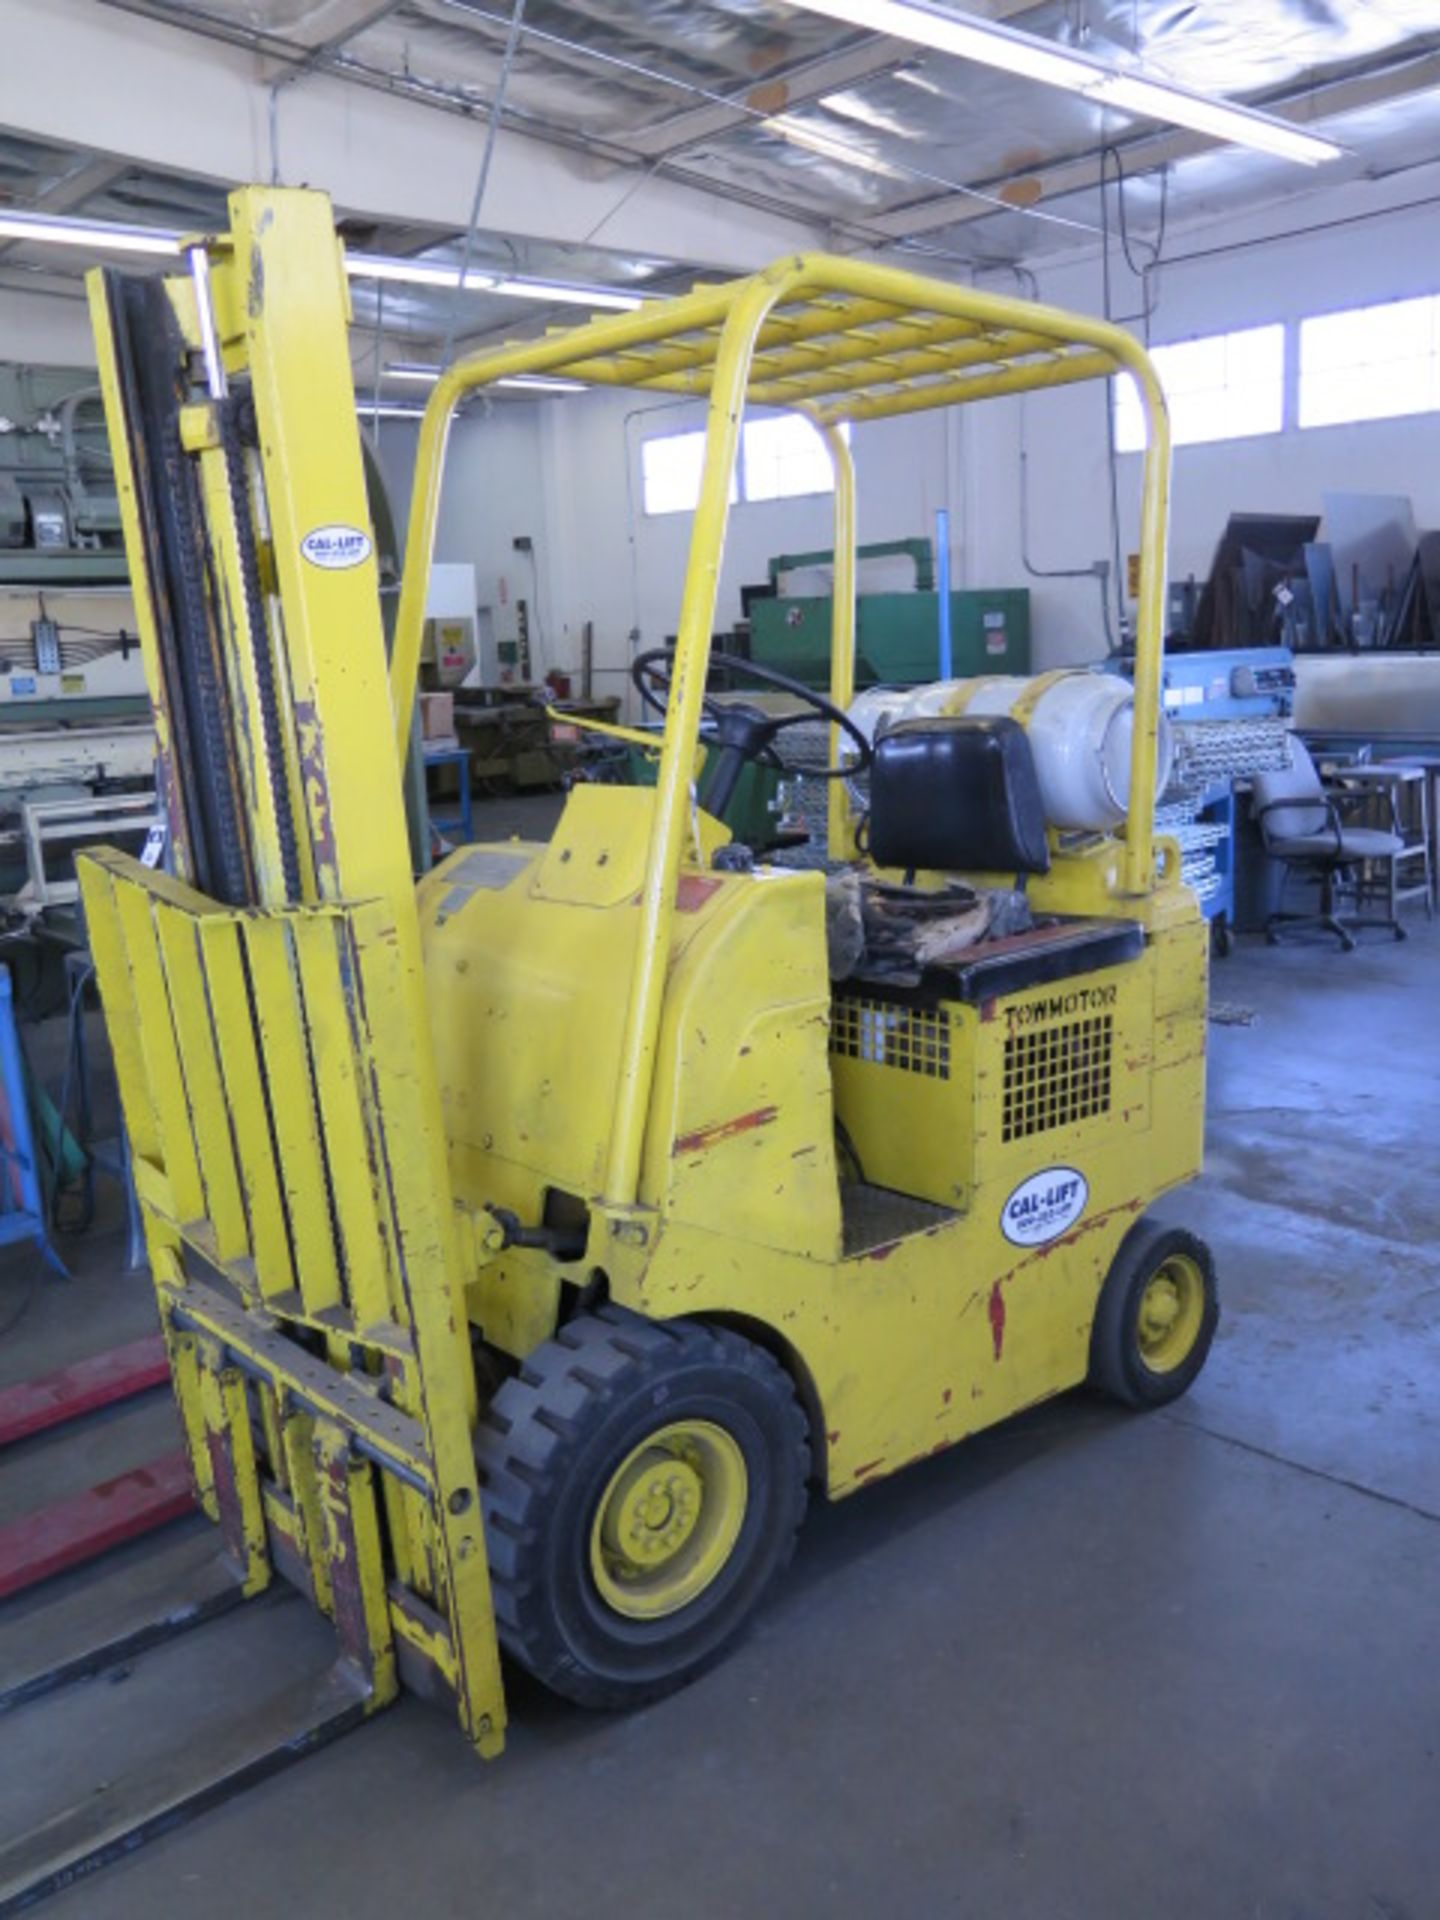 Towmotor mdl. 510P 2000 Lb Cap LPG Forklift s/n 28L660 w/ 2-Stage Mast, 146” Lift Height, Solid - Image 2 of 4